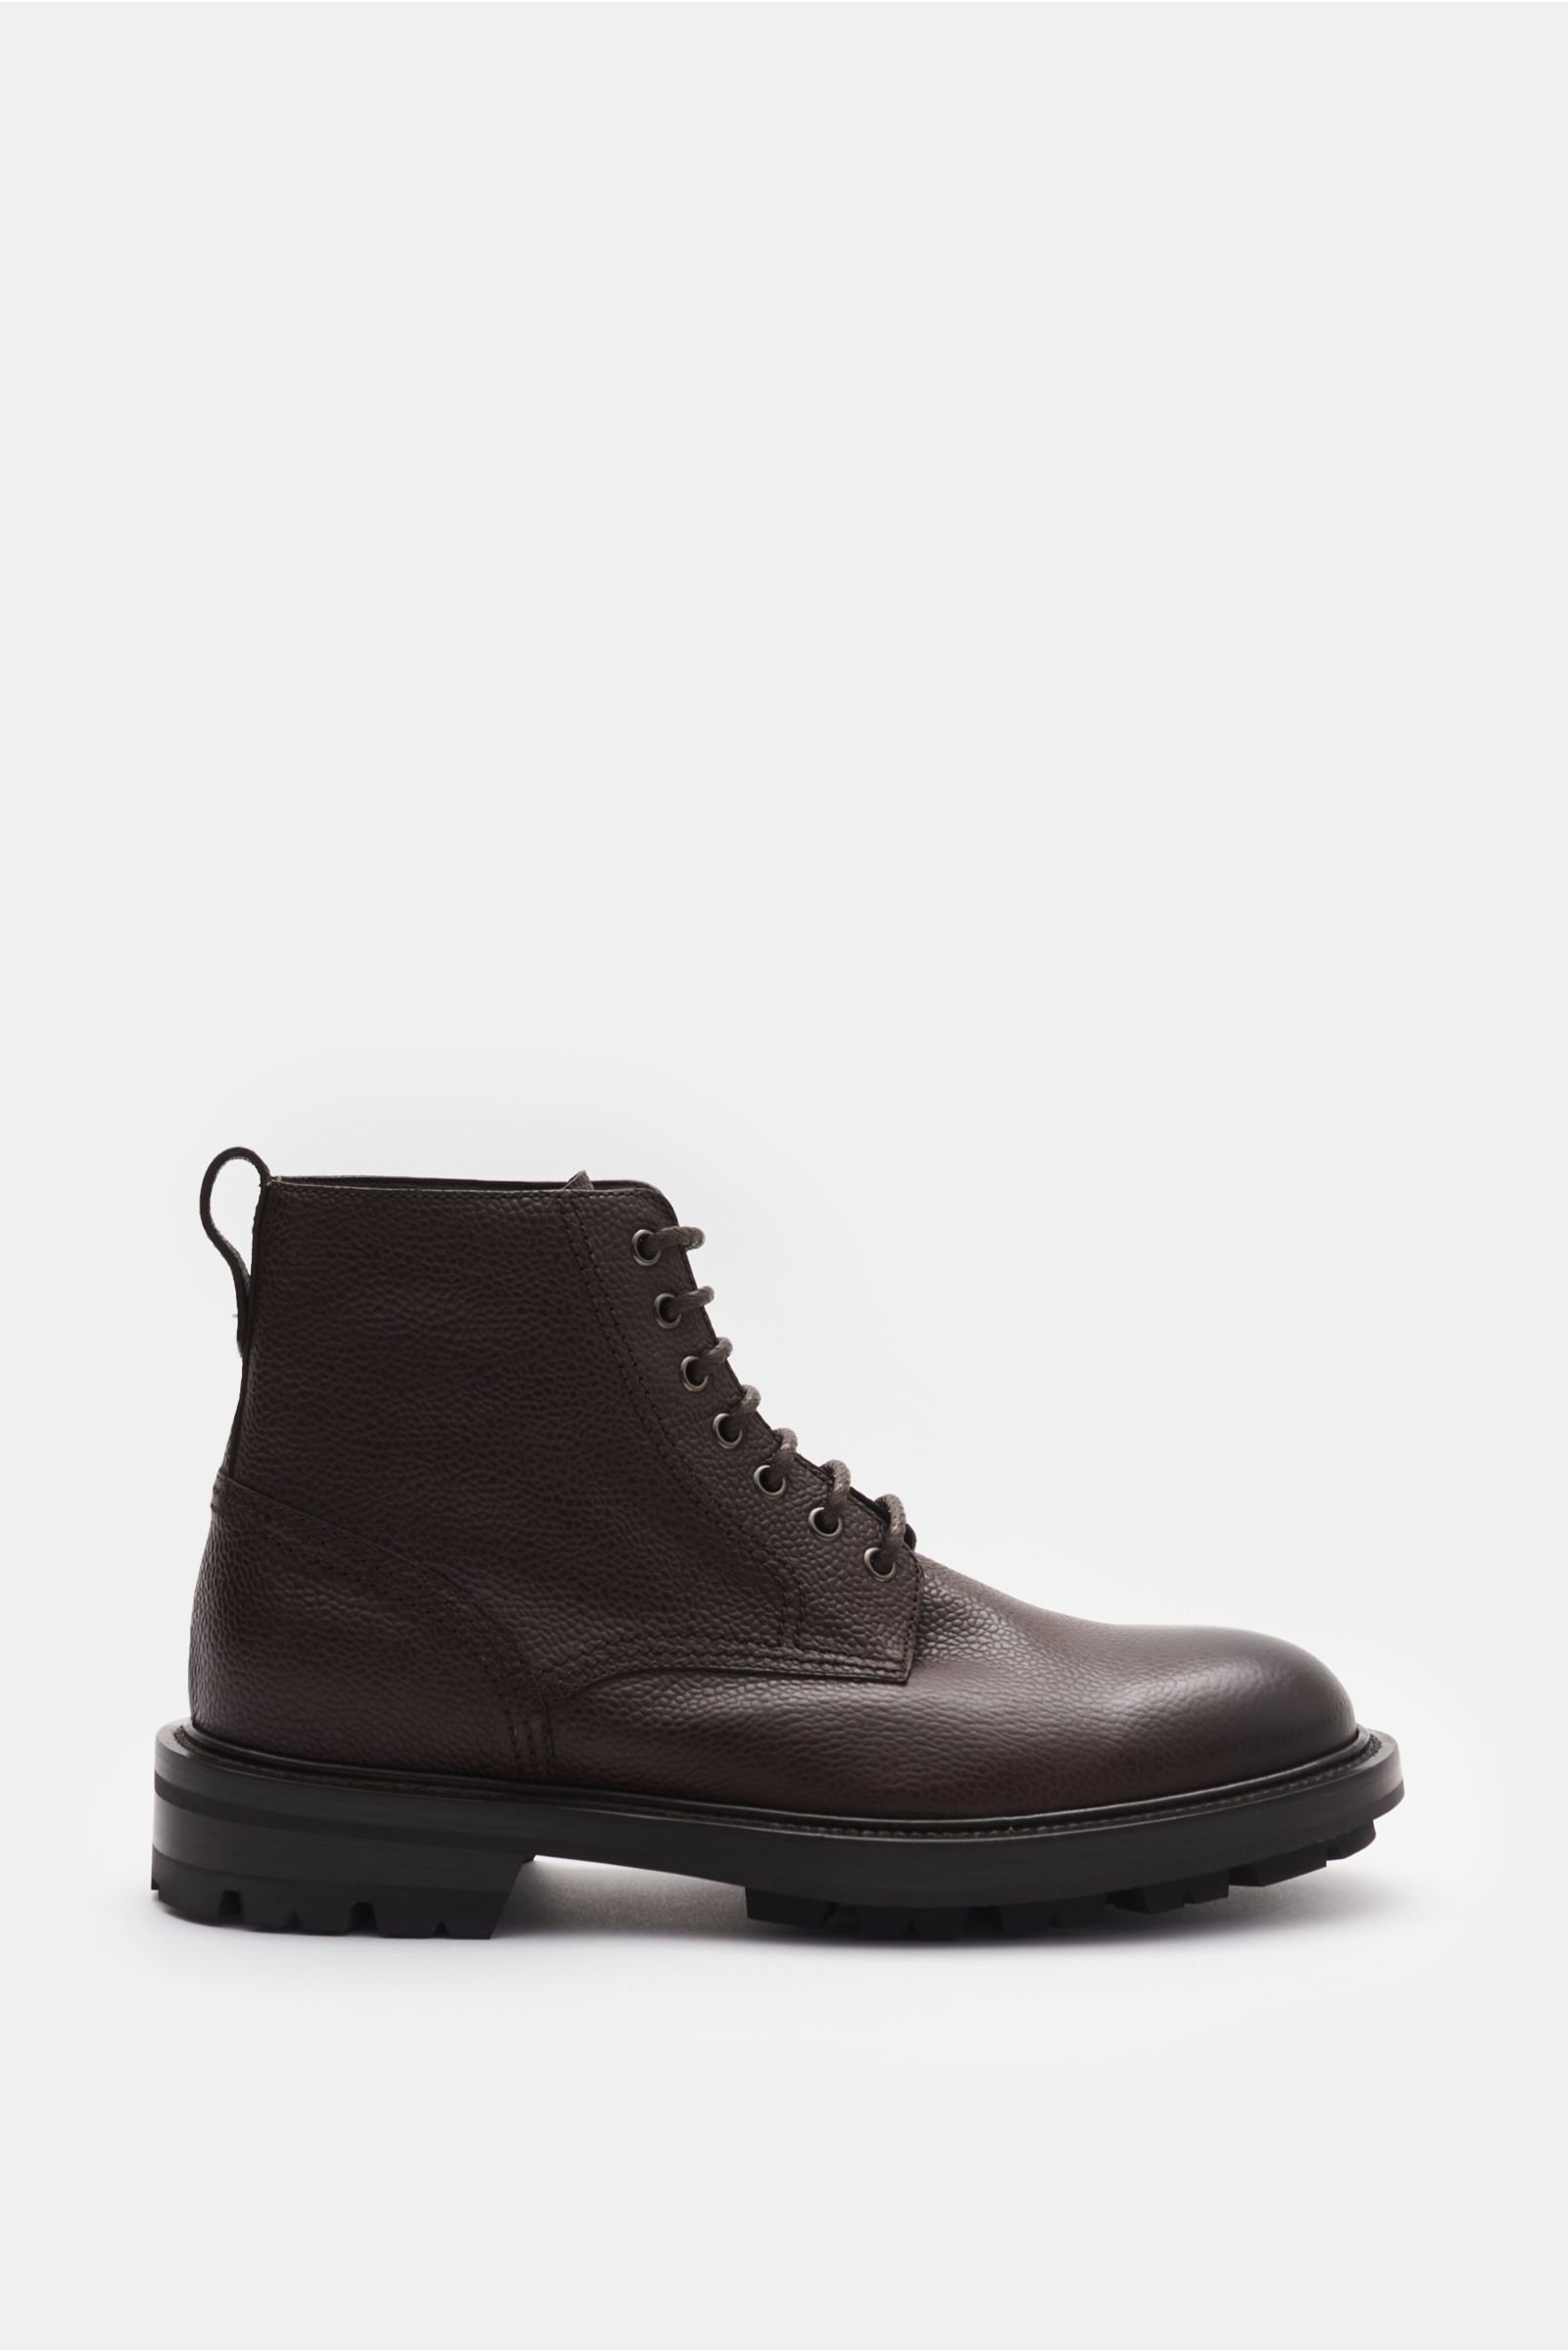 Lace-up boots 'Scotch Delave' dark brown